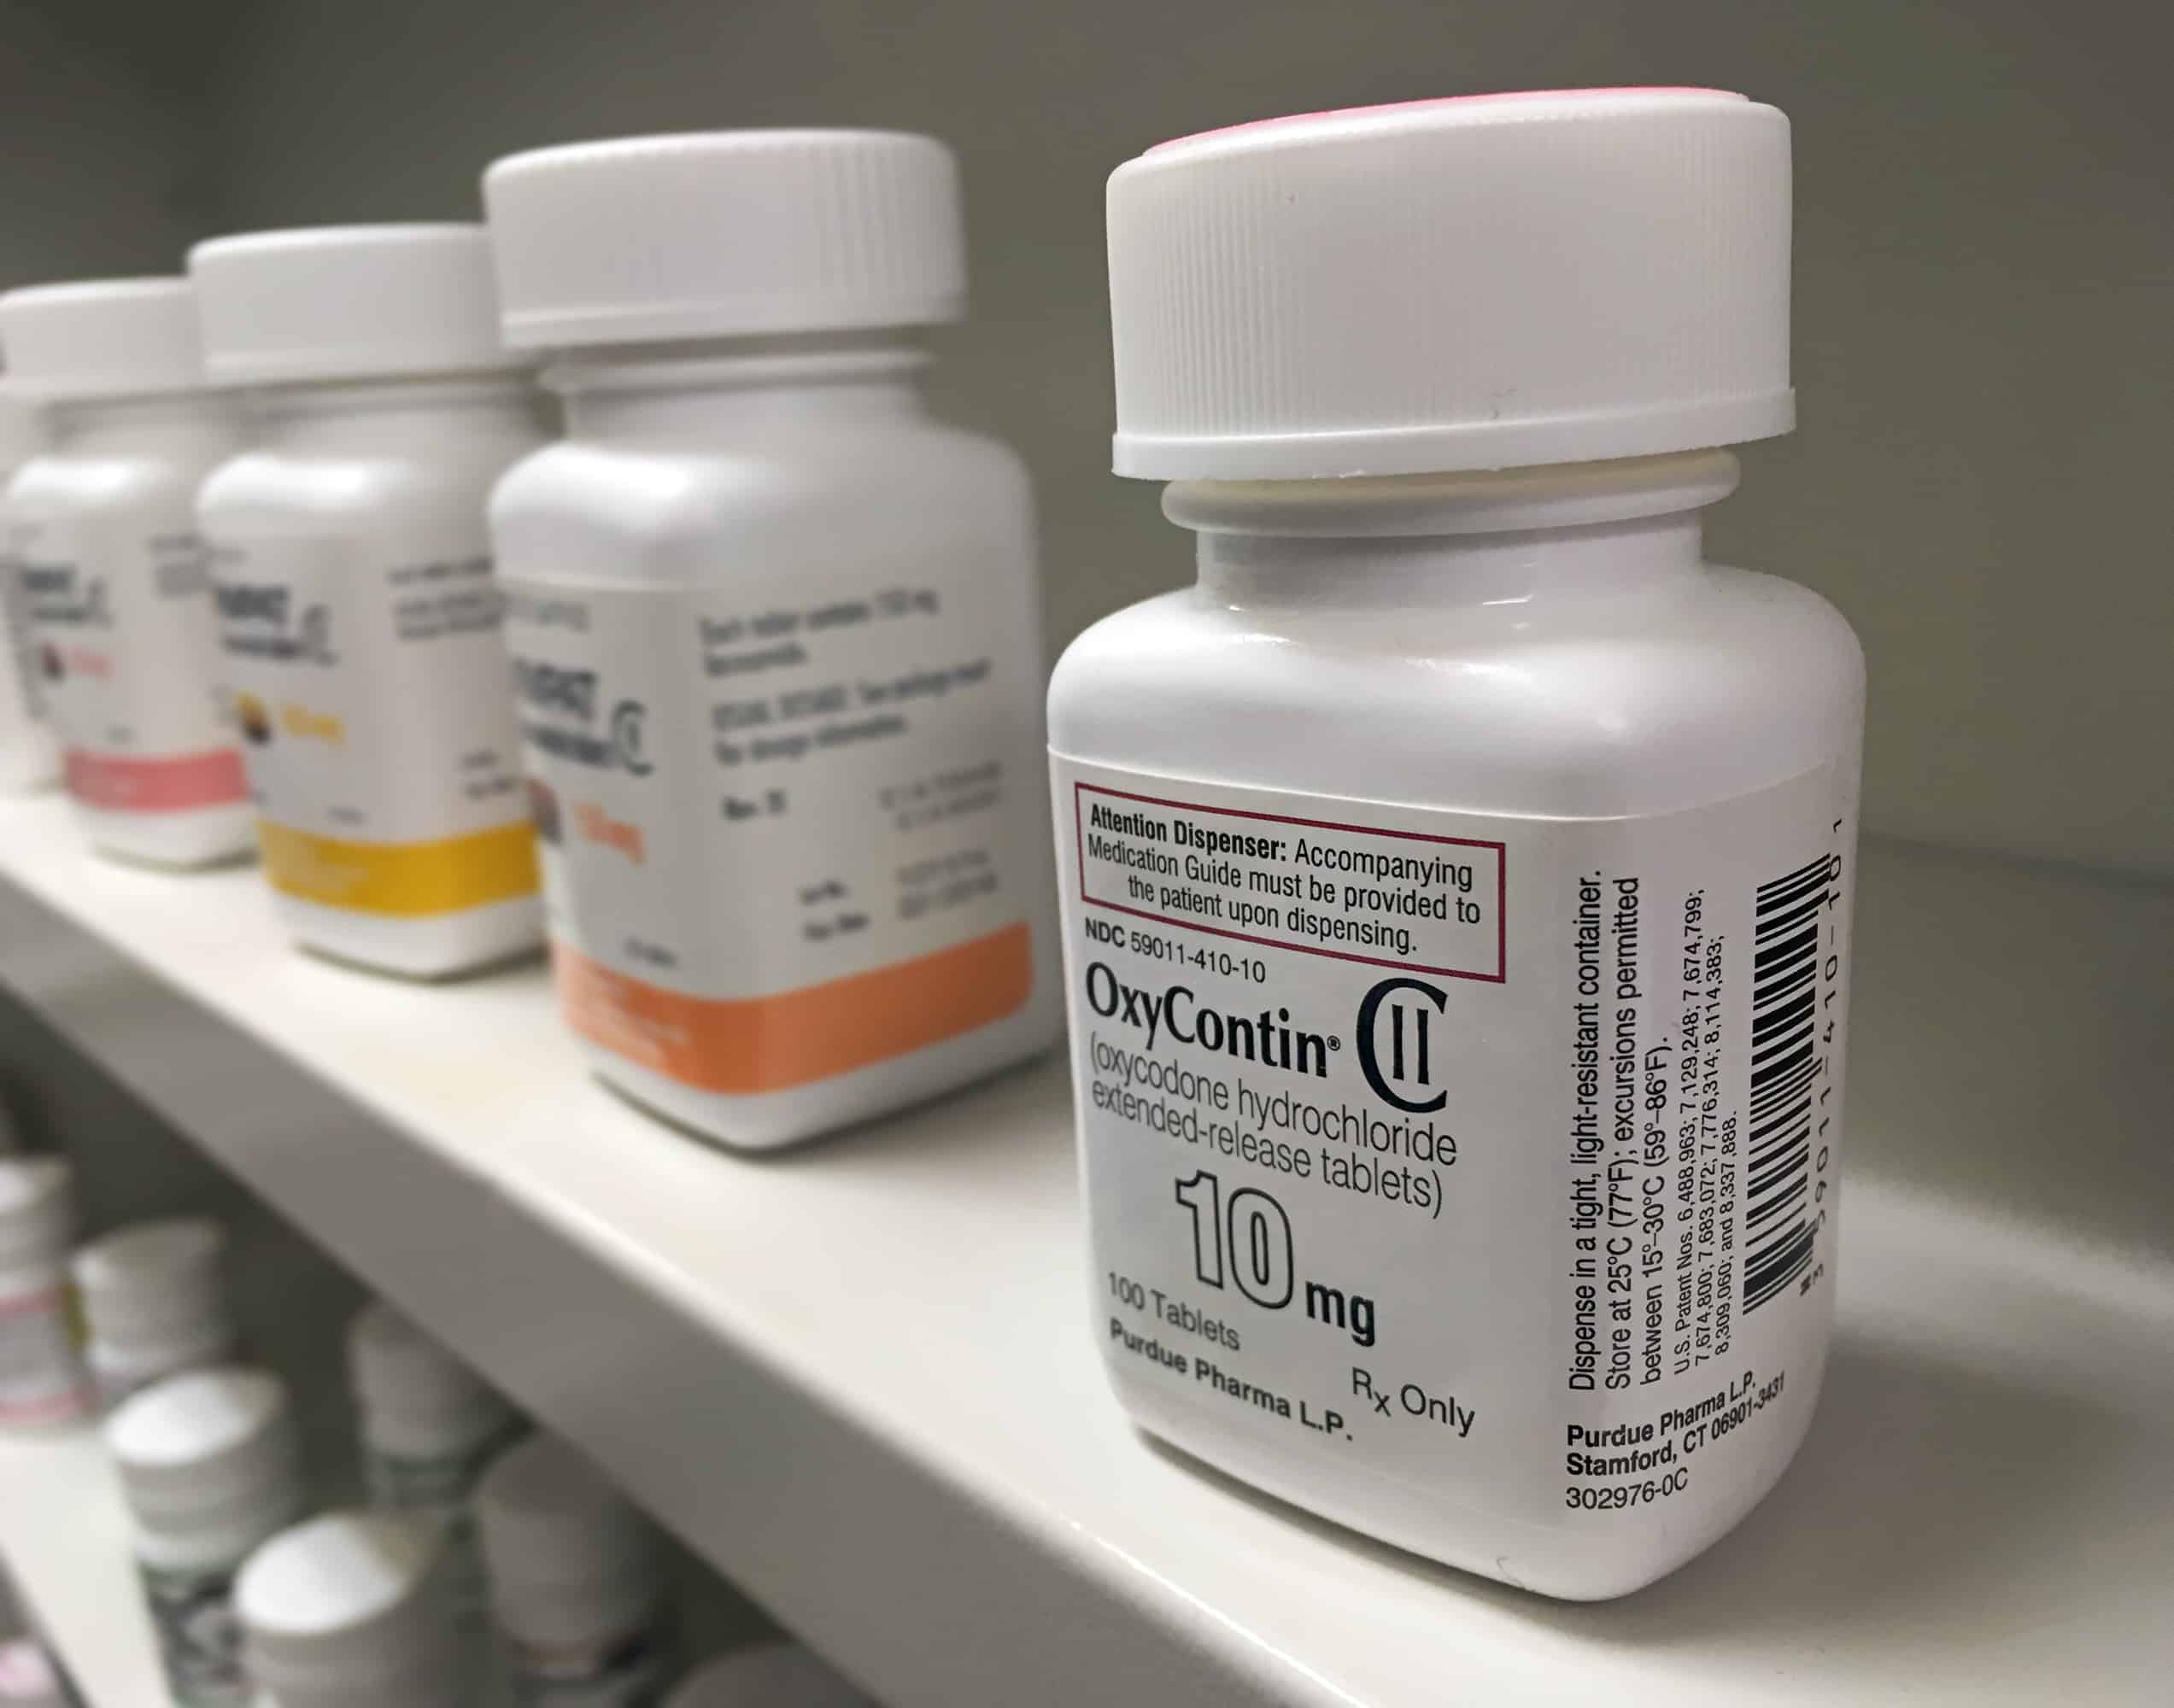 Oxycontin abuse illustration with pill bottles of oxycontin lined up on a shelf